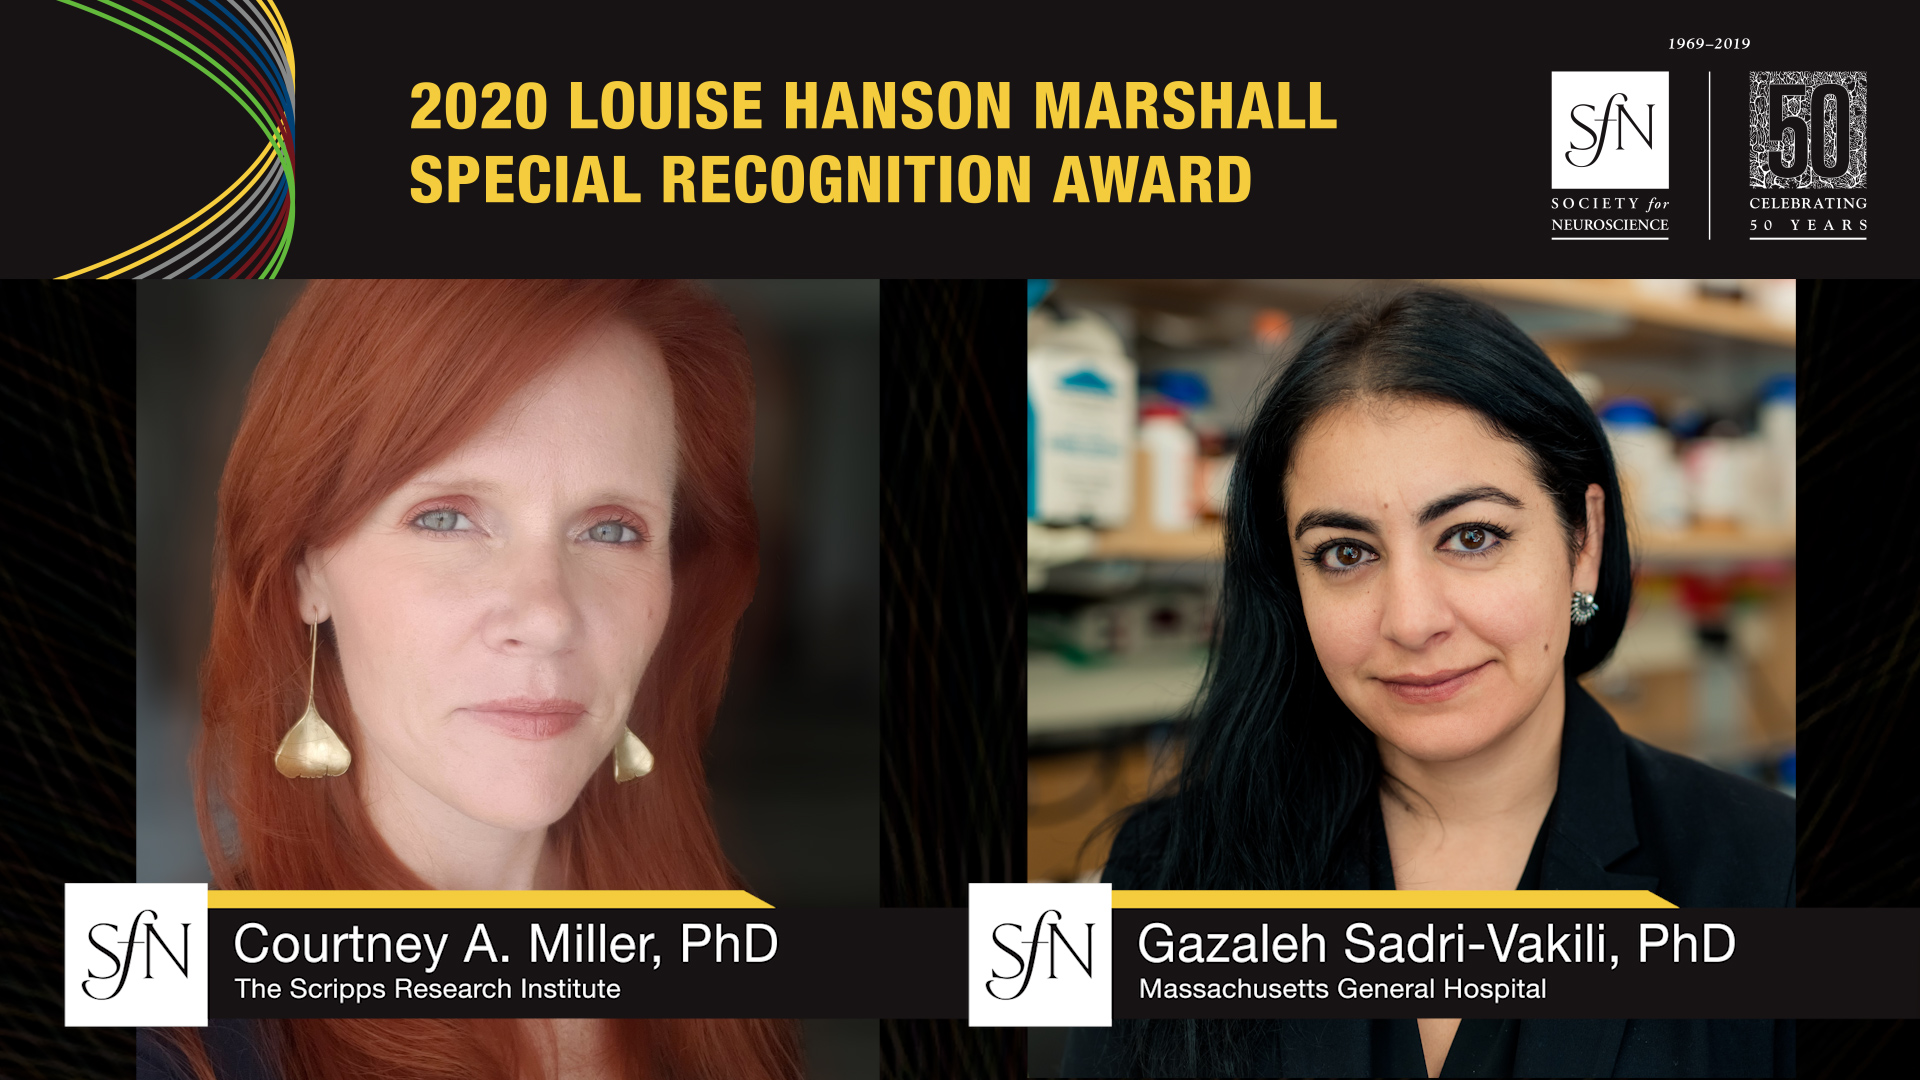 2020 Louise Hanson Marshall Special Recognition Award winners graphic, images of Courtney A. Miller, PhD The Scripps Research Institute and Gazaleh Sadri-Vakili, PhD Massachusetts General Hospital